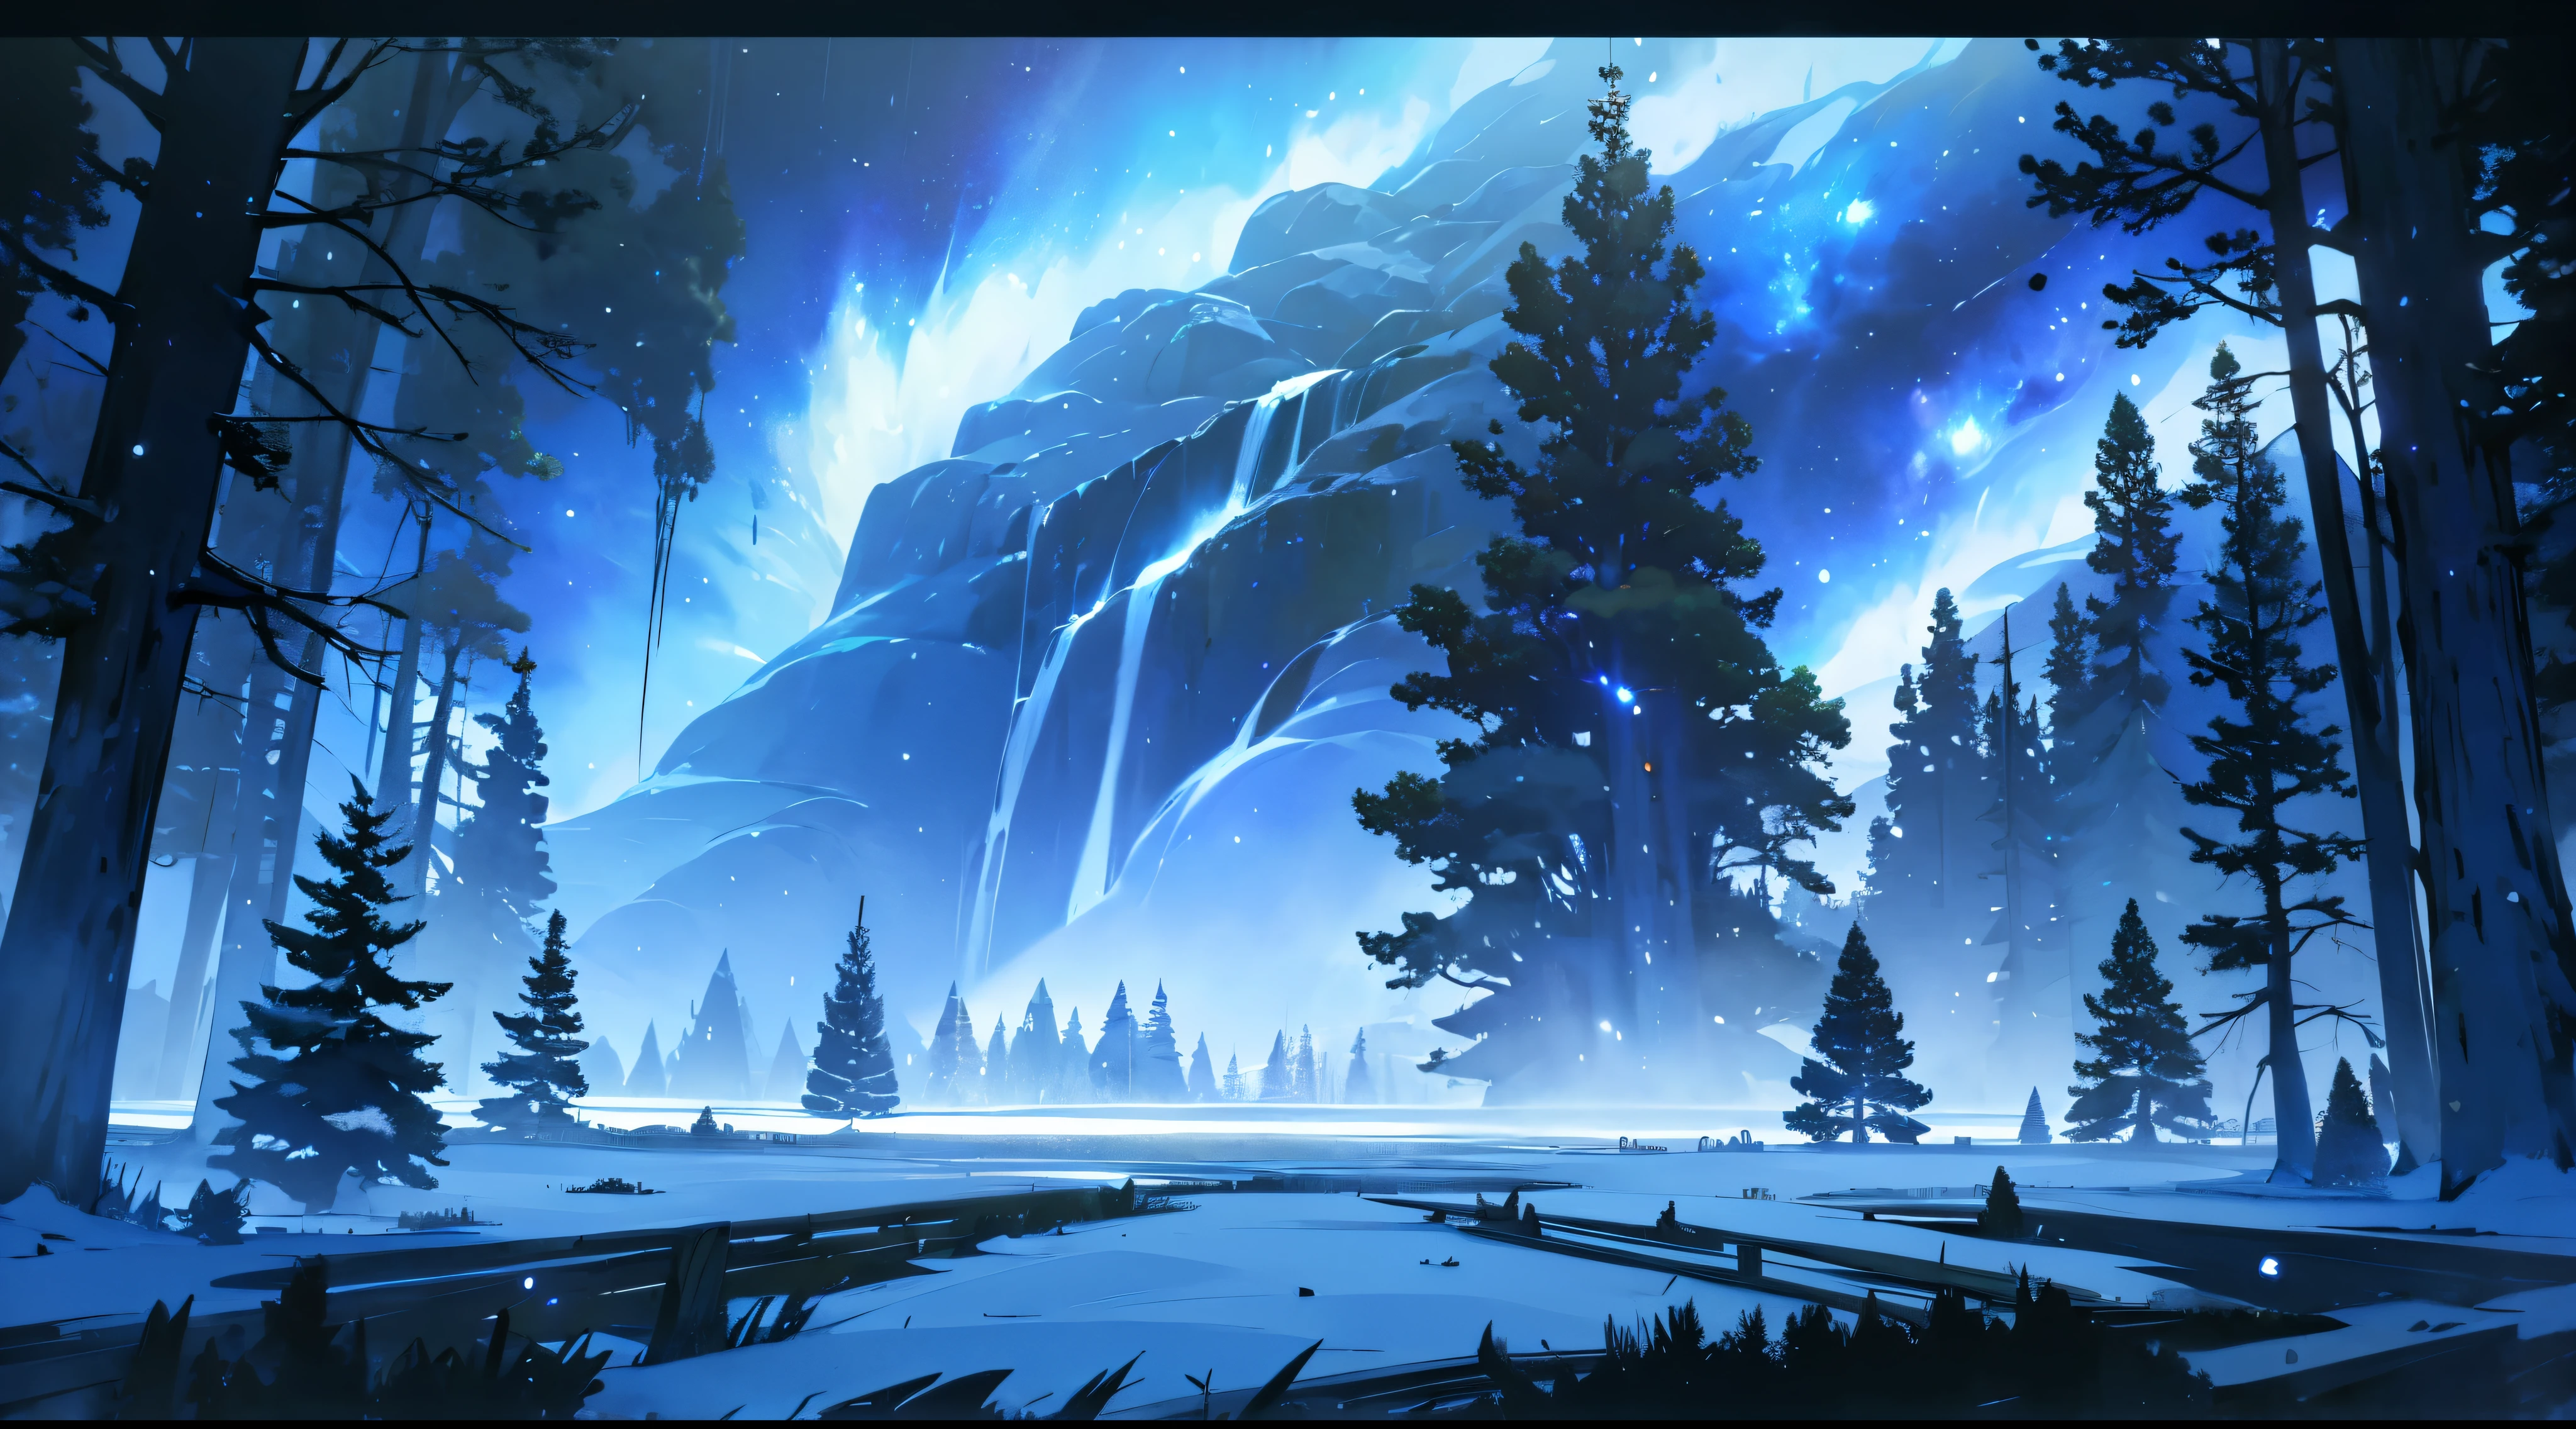 night forest, cozy illustration, Milky Way, winter, breath taking beautiful, silence and night, landscape, scale frame, view from afar, complex composition